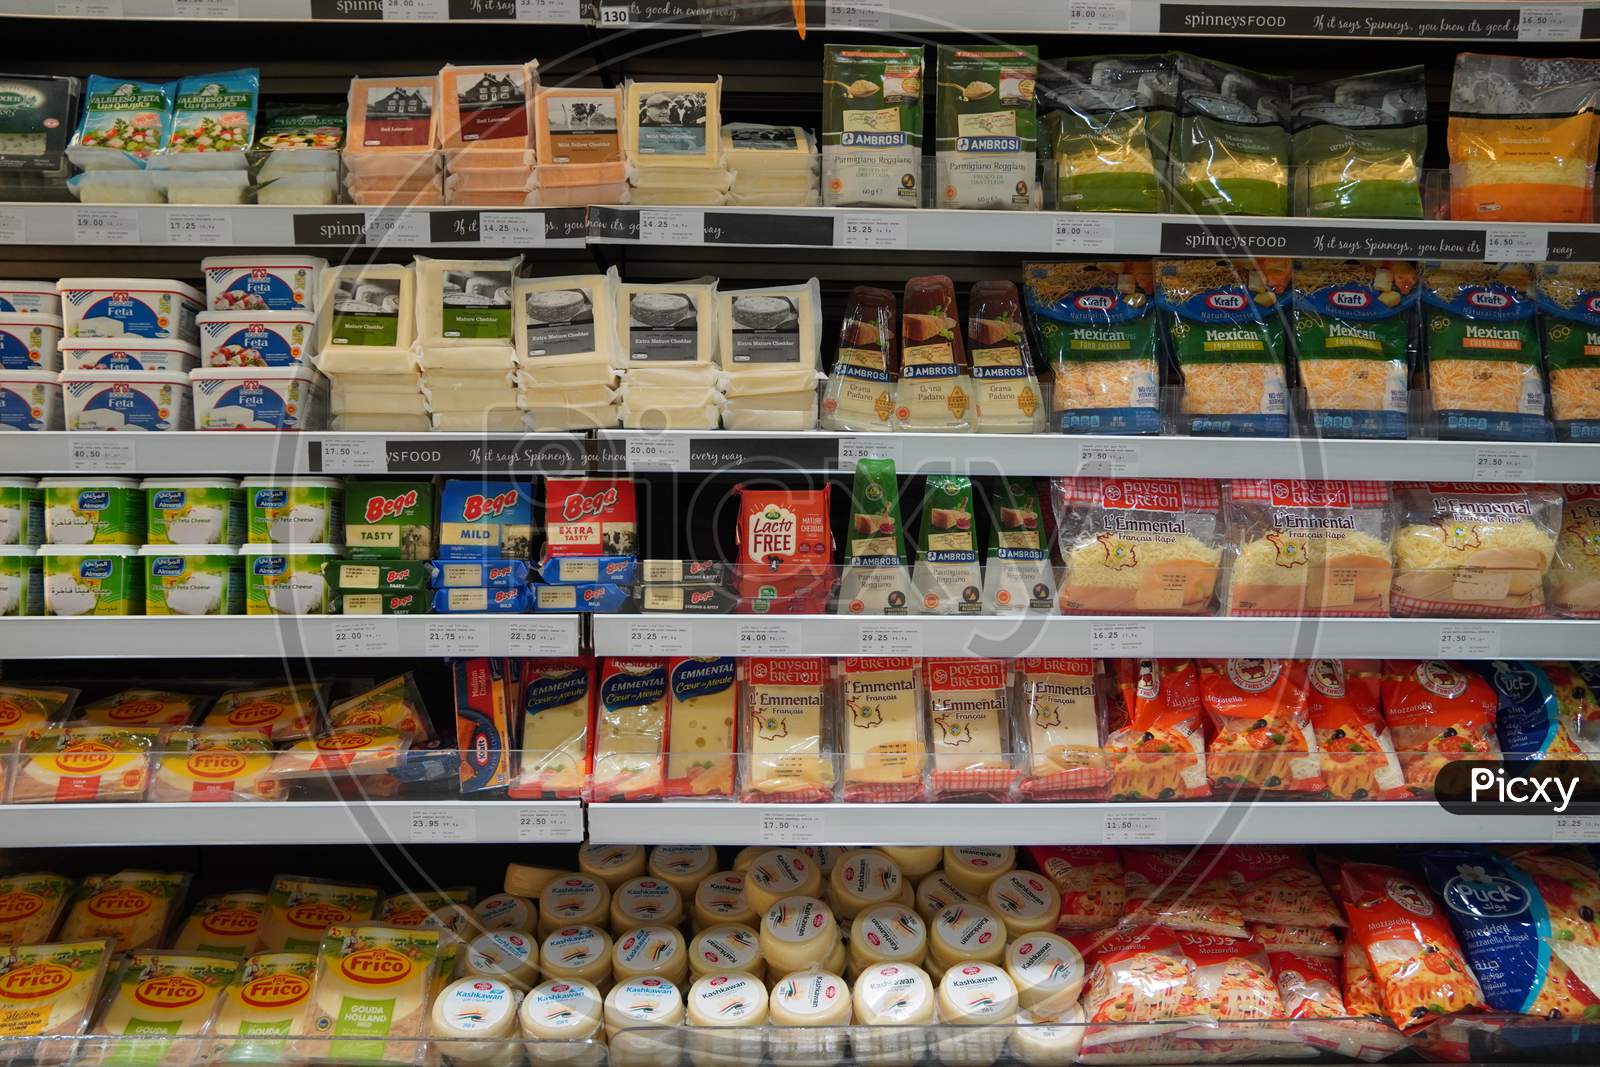 Different Types Of Cheese On Shelves In A Grocery Store. Shelf Of Packaged Products, Butter And Cheese At A Market. Cheddar, Edam, Mozzarella, Gouda, Blue Cheese.